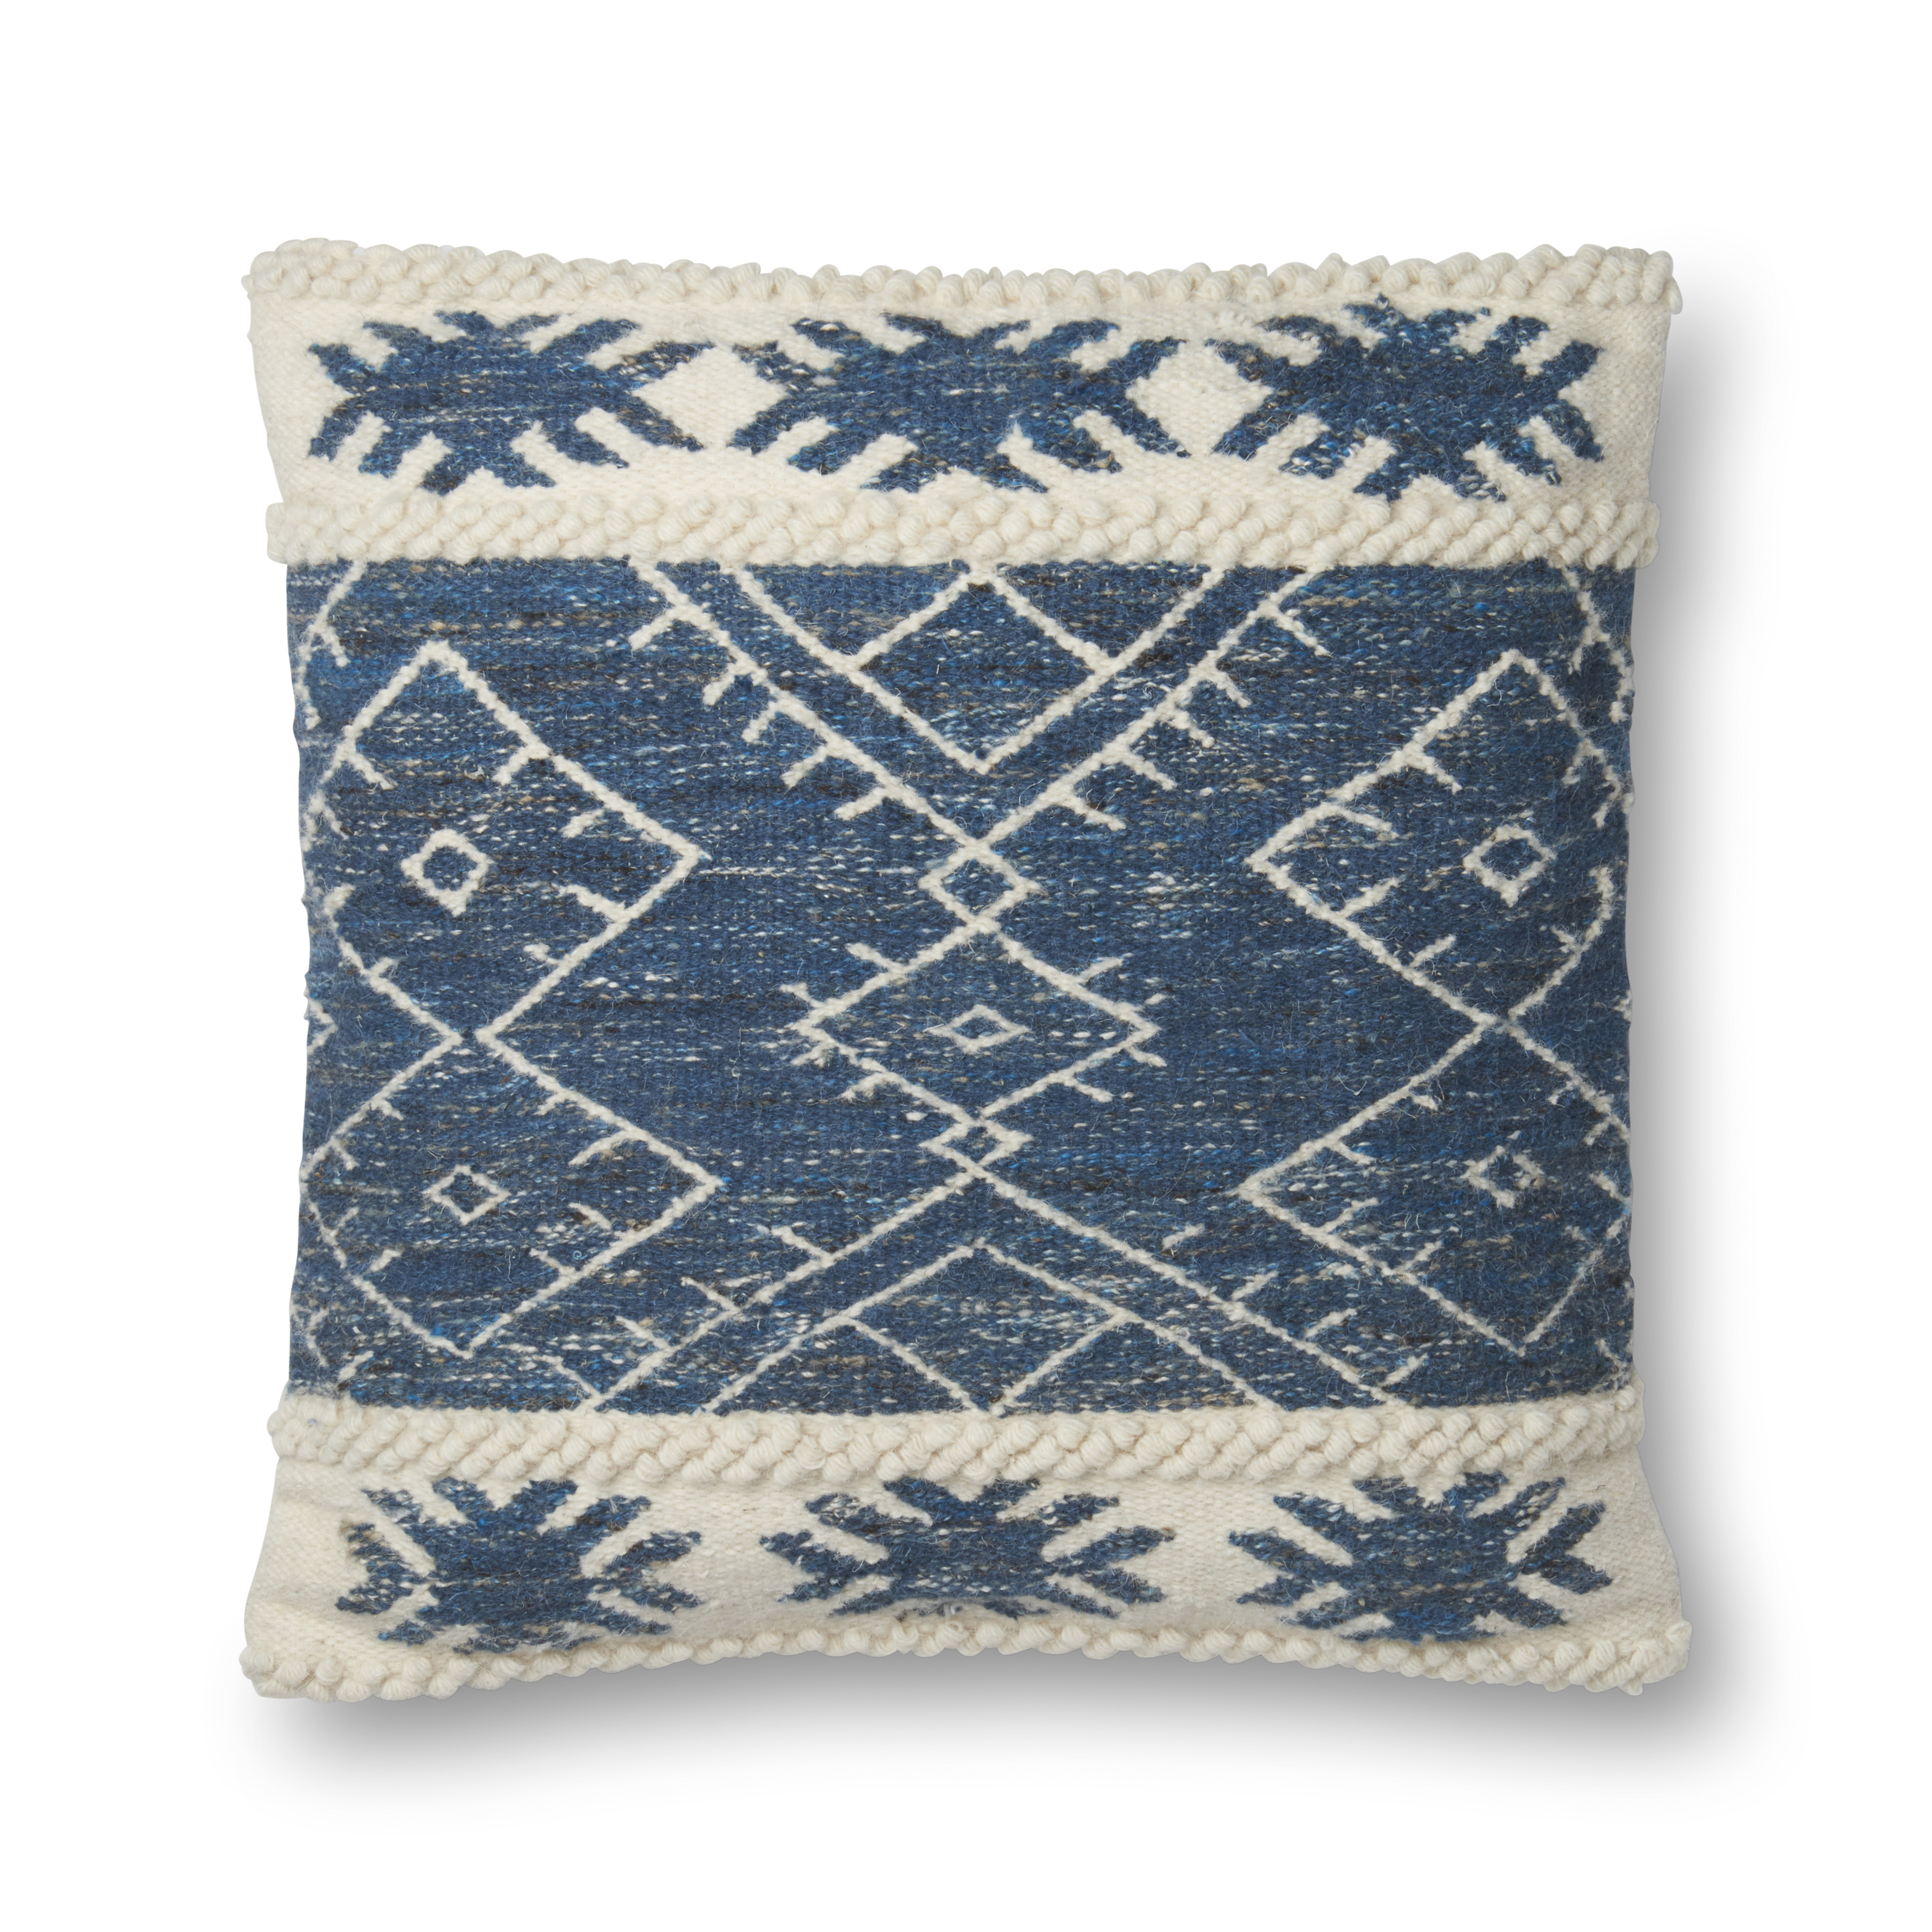 Wool & Bamboo Viscose Throw Pillow Cover, 22" x 22", Blue & Ivory - Loloi Rugs